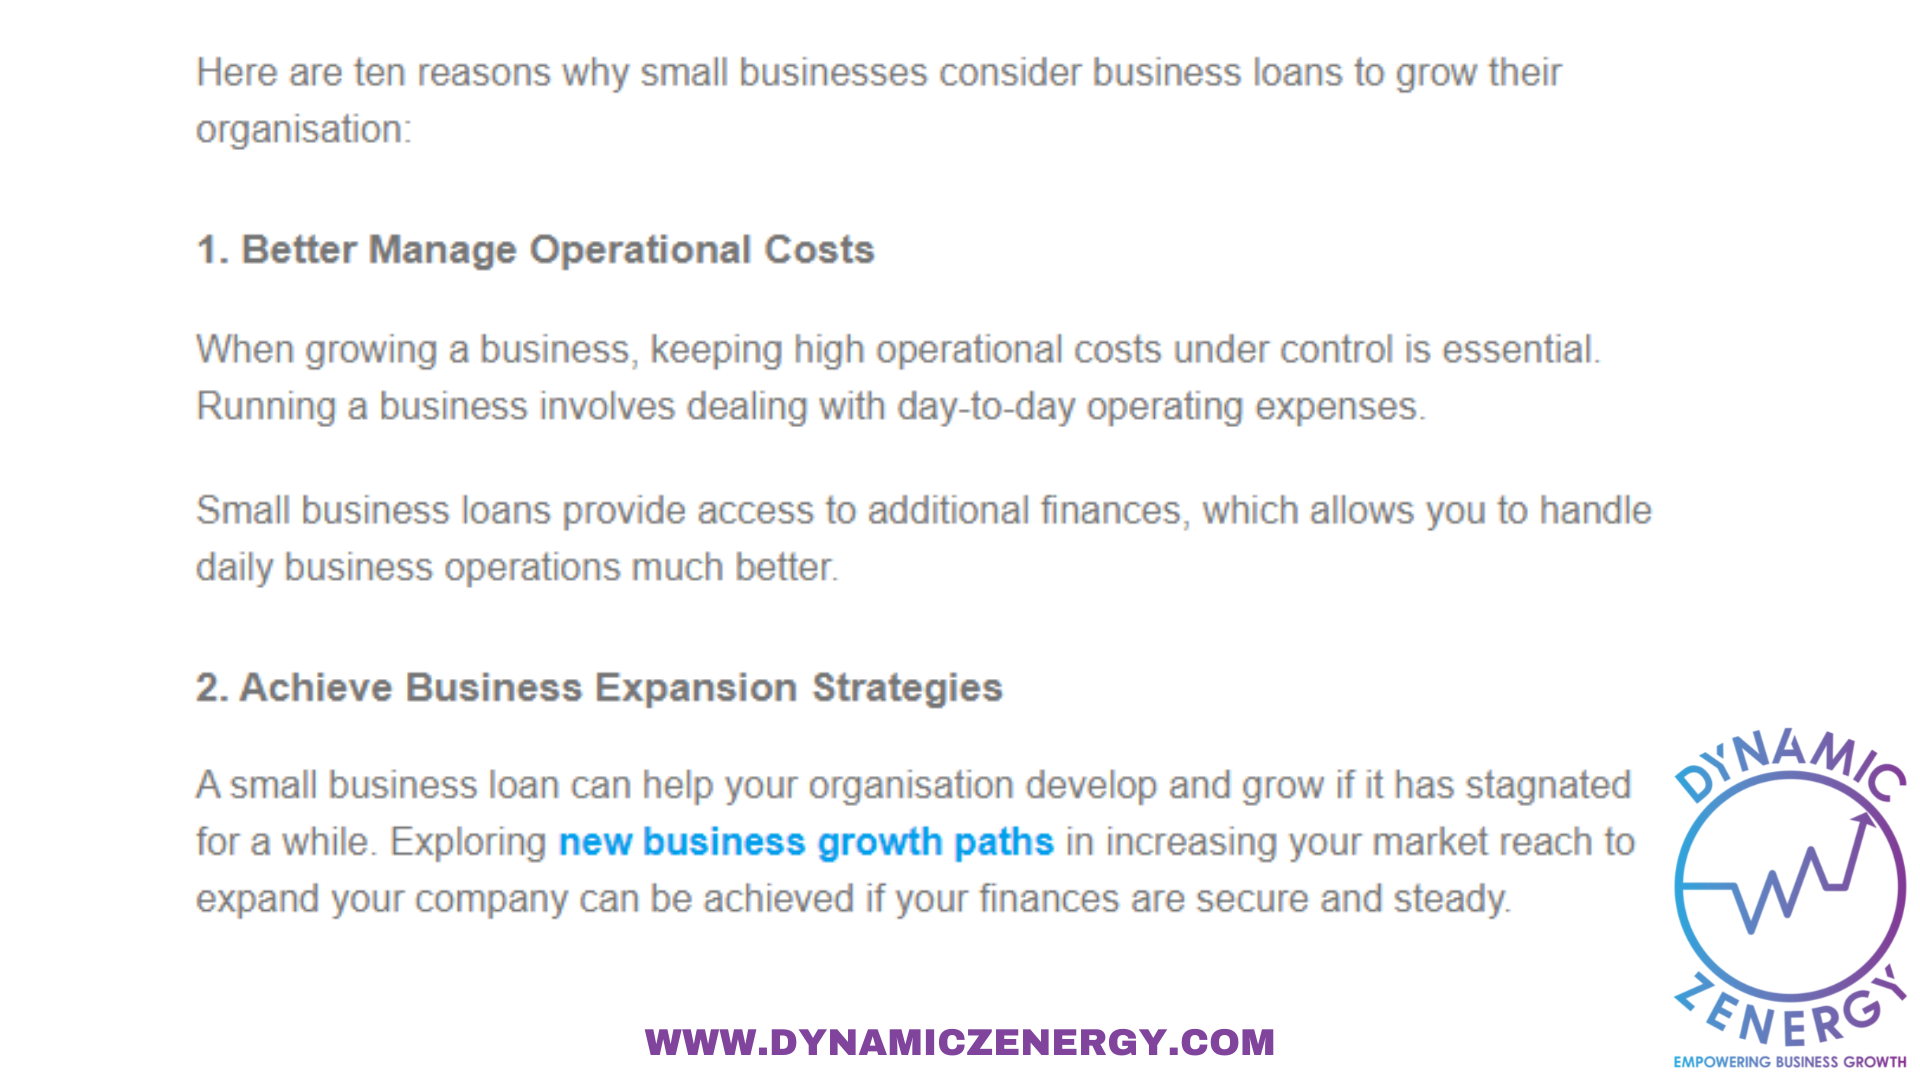 How Can Small Business Loan Be A Smart Way To Grow Your Business